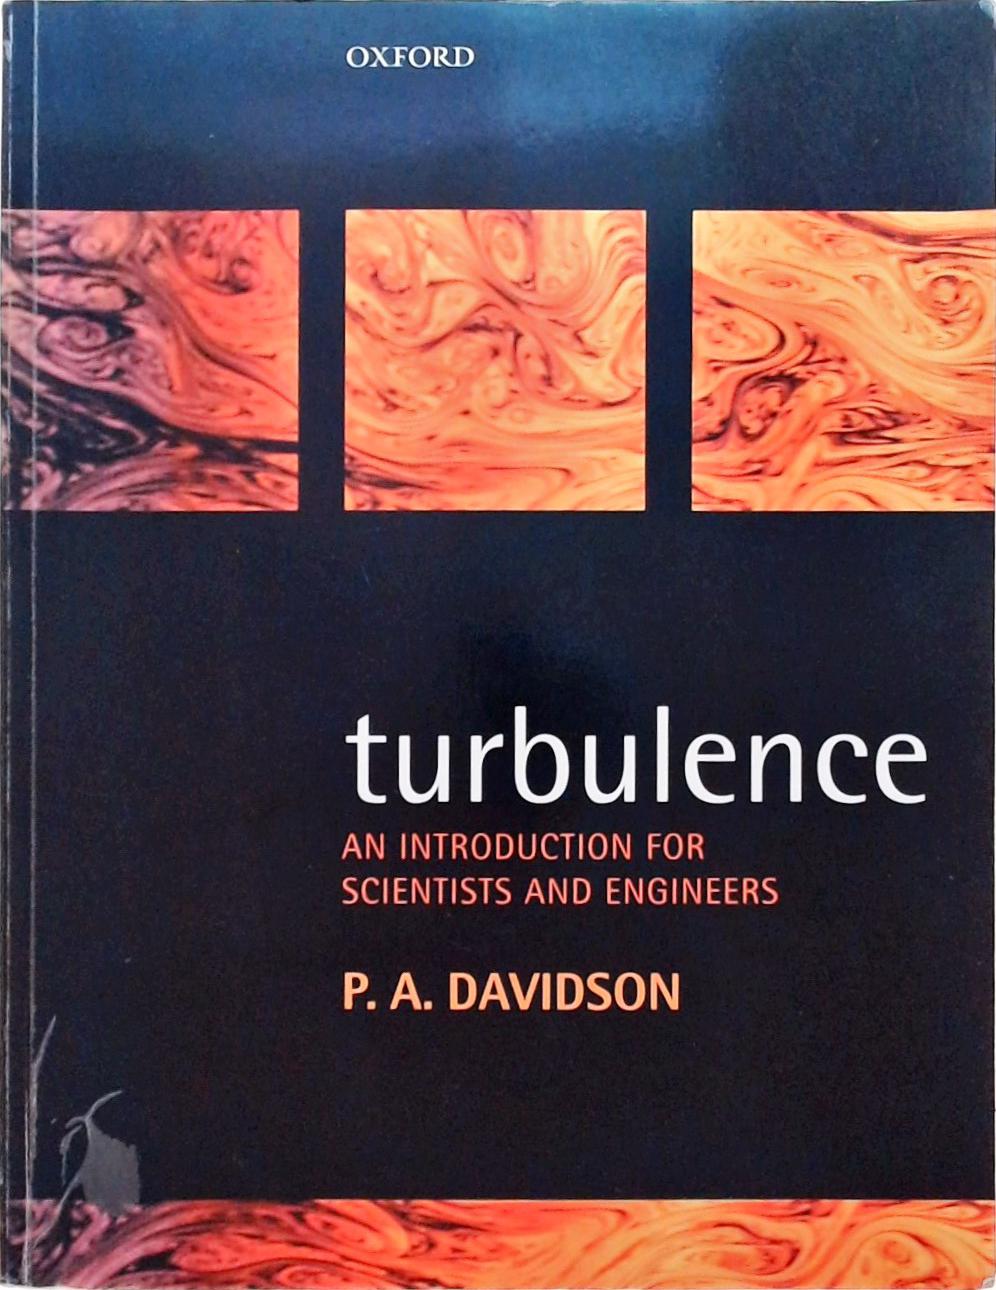 Turbulence - An Introduction for Scientists and Engineers